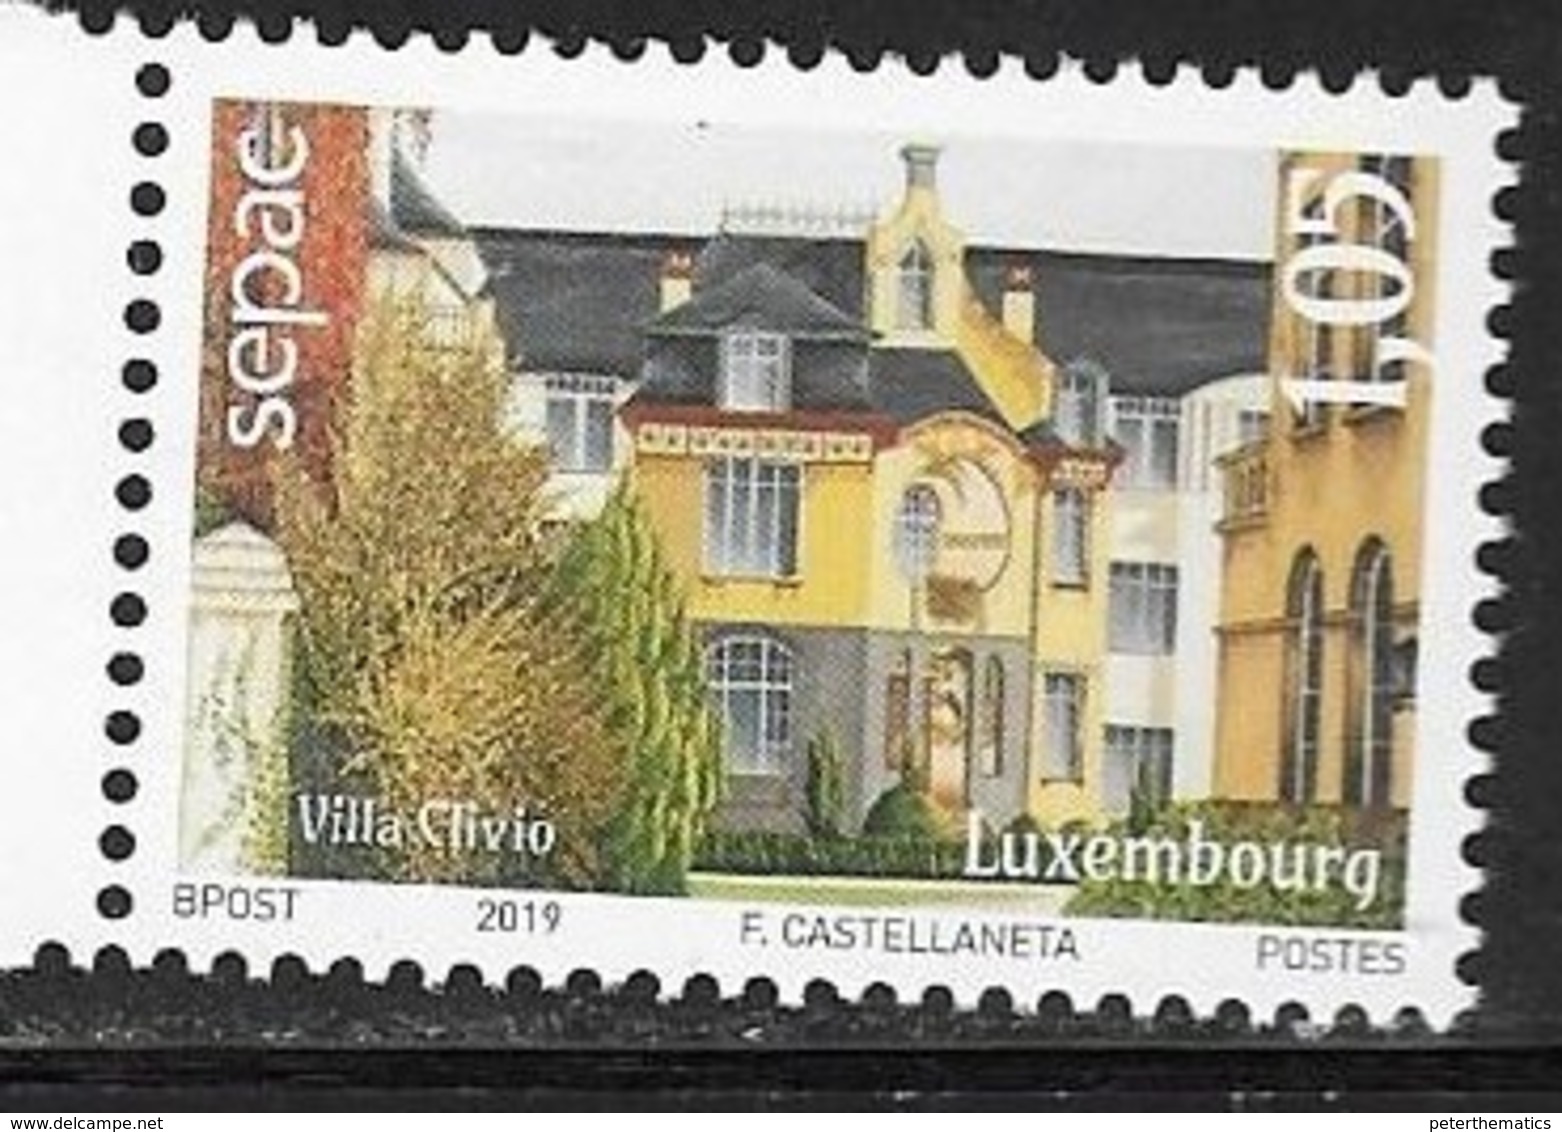 LUXEMBOURG, 2019, MNH, JOINT ISSUES, SEPAC, ARCHITECTURE, 1v - Joint Issues